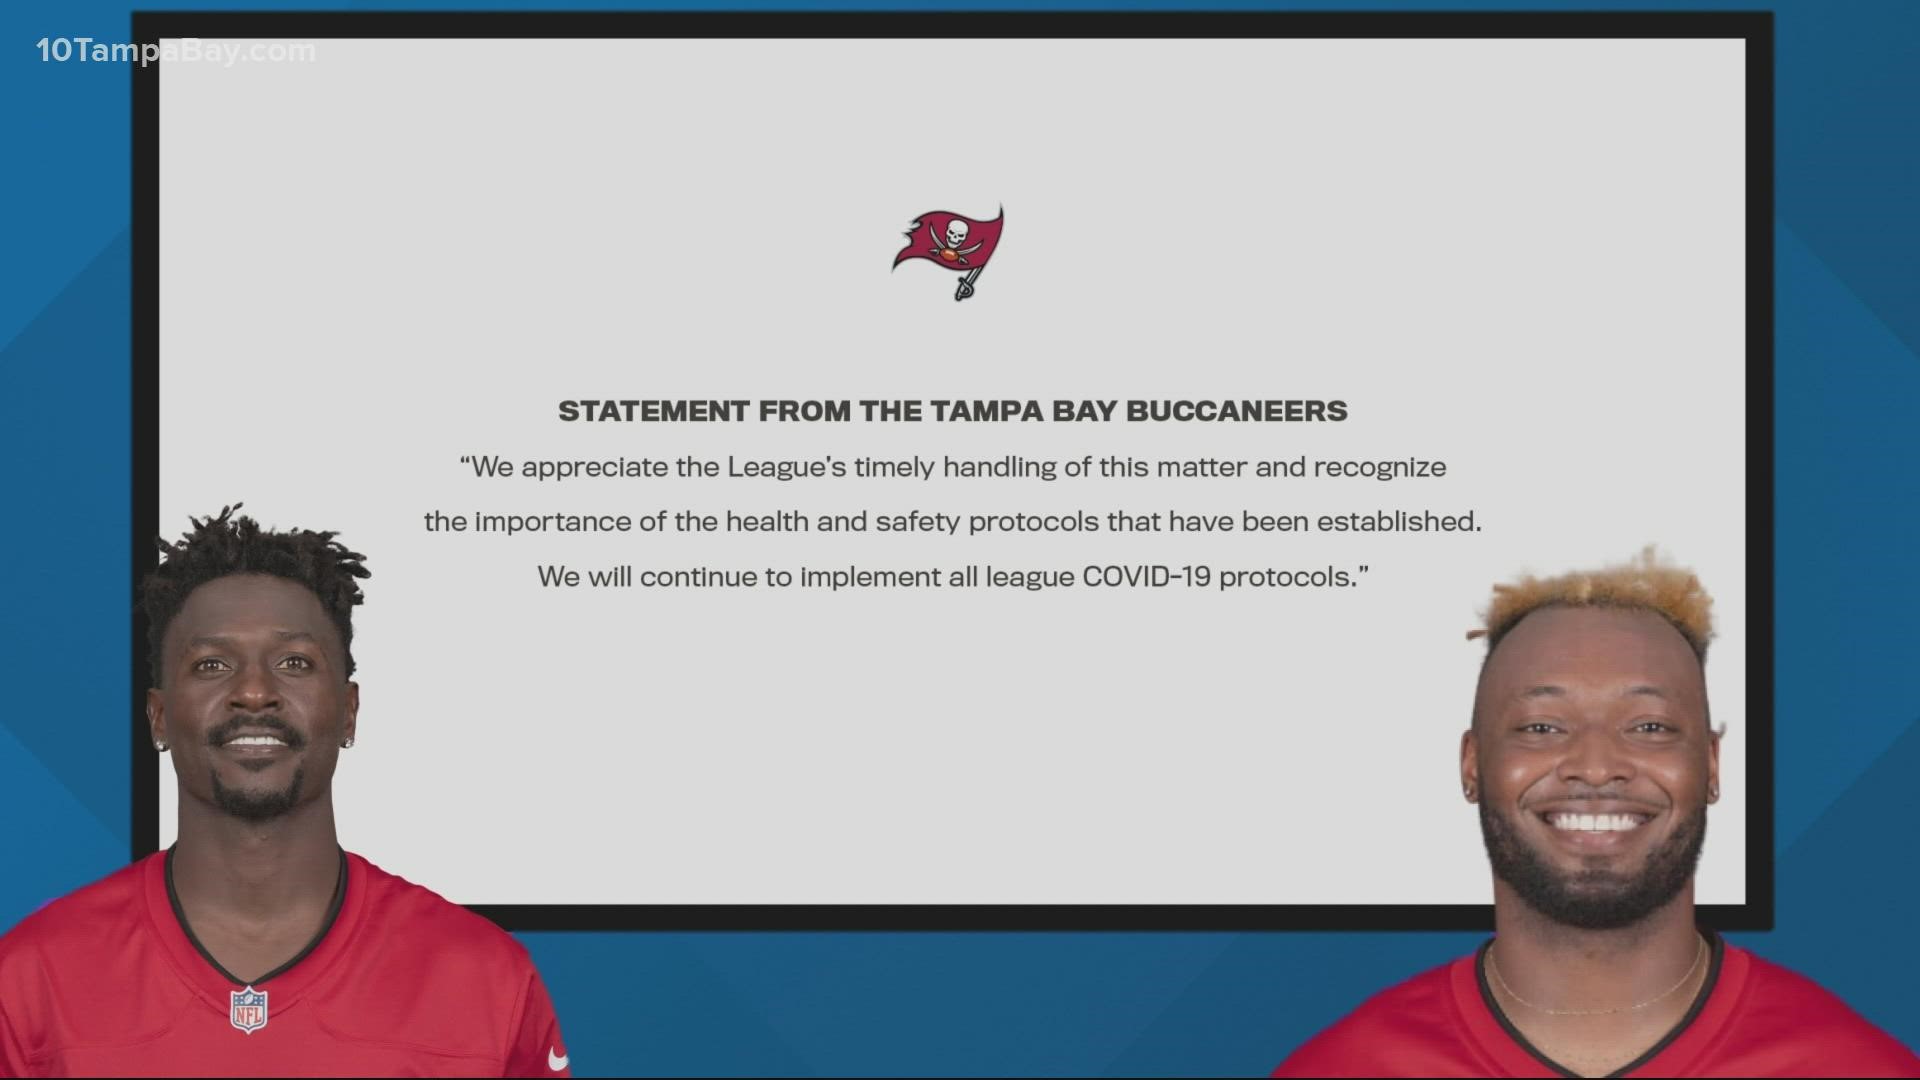 The league says both Bucs players "misrepresented their vaccination status."